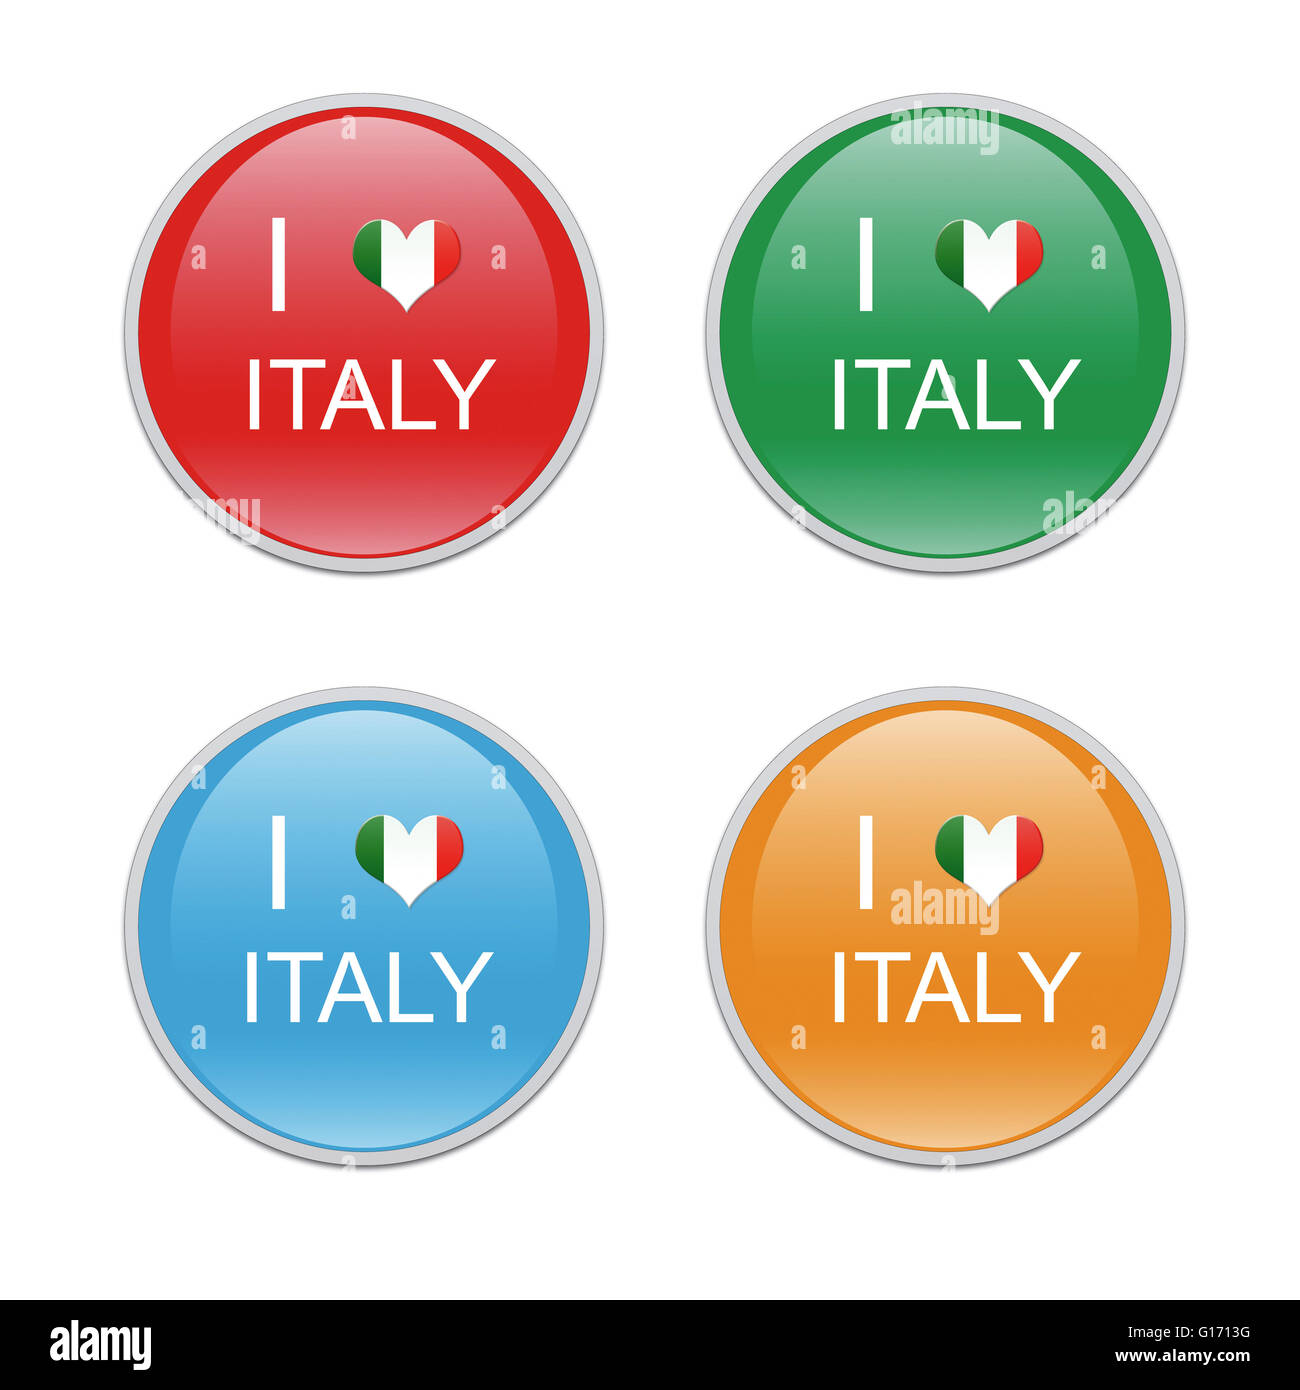 Icons to symbolize I Love Italy in red, green, blue and orange colors Stock Photo